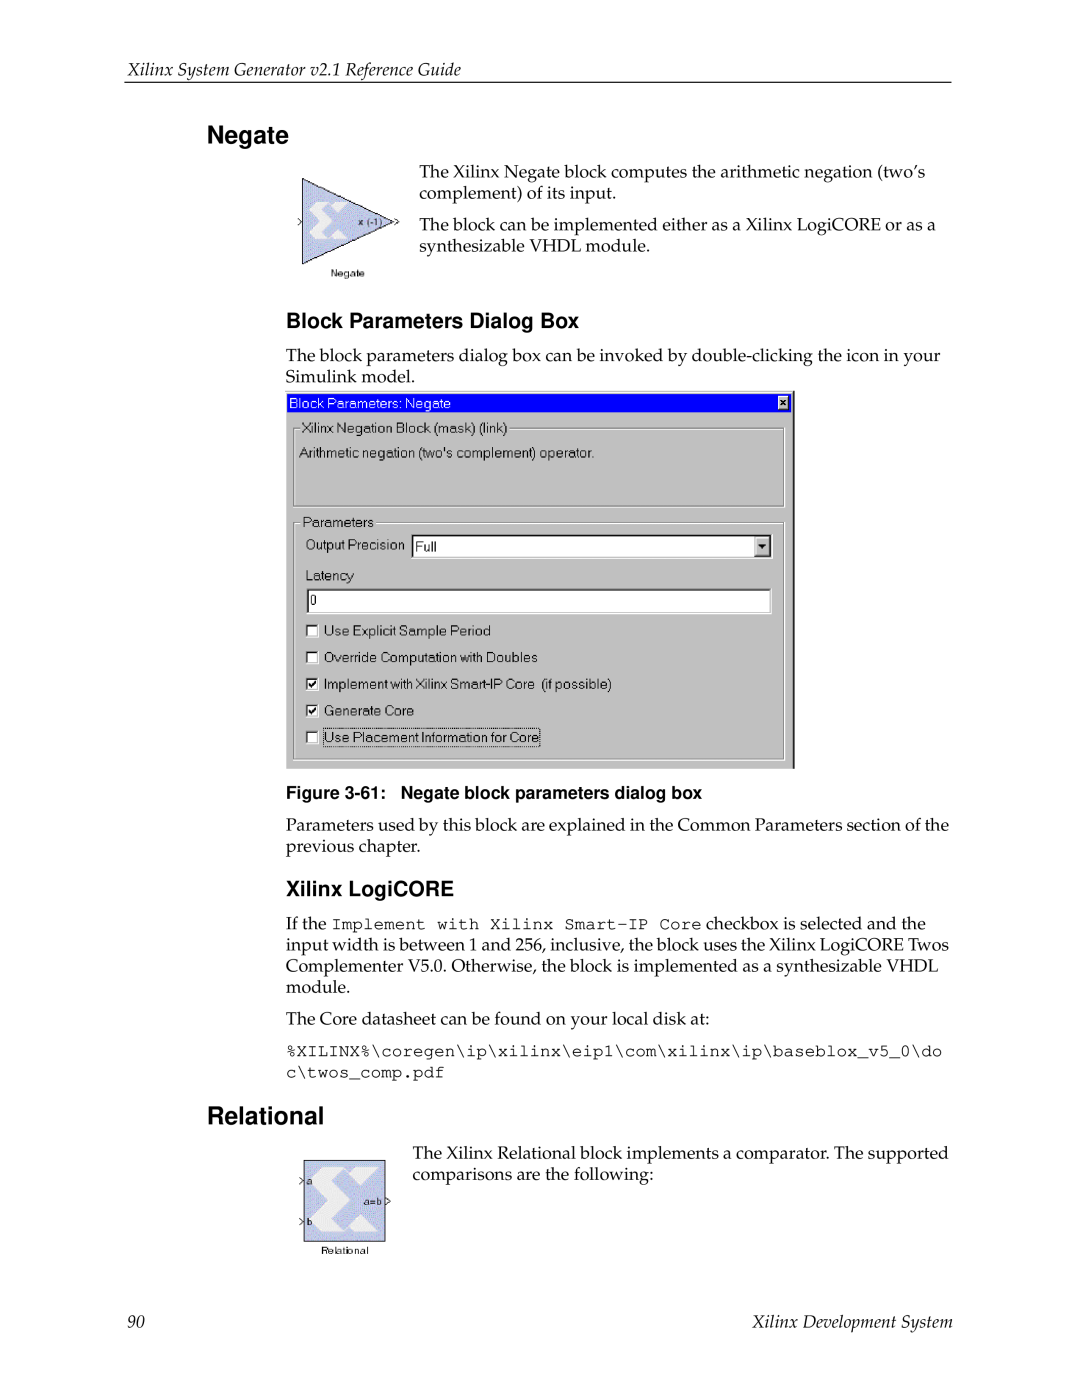 Xilinx V2.1 Negate, Relational, Block Parameters Dialog Box, Xilinx LogiCORE, Xilinx System Generator v2.1 Reference Guide 